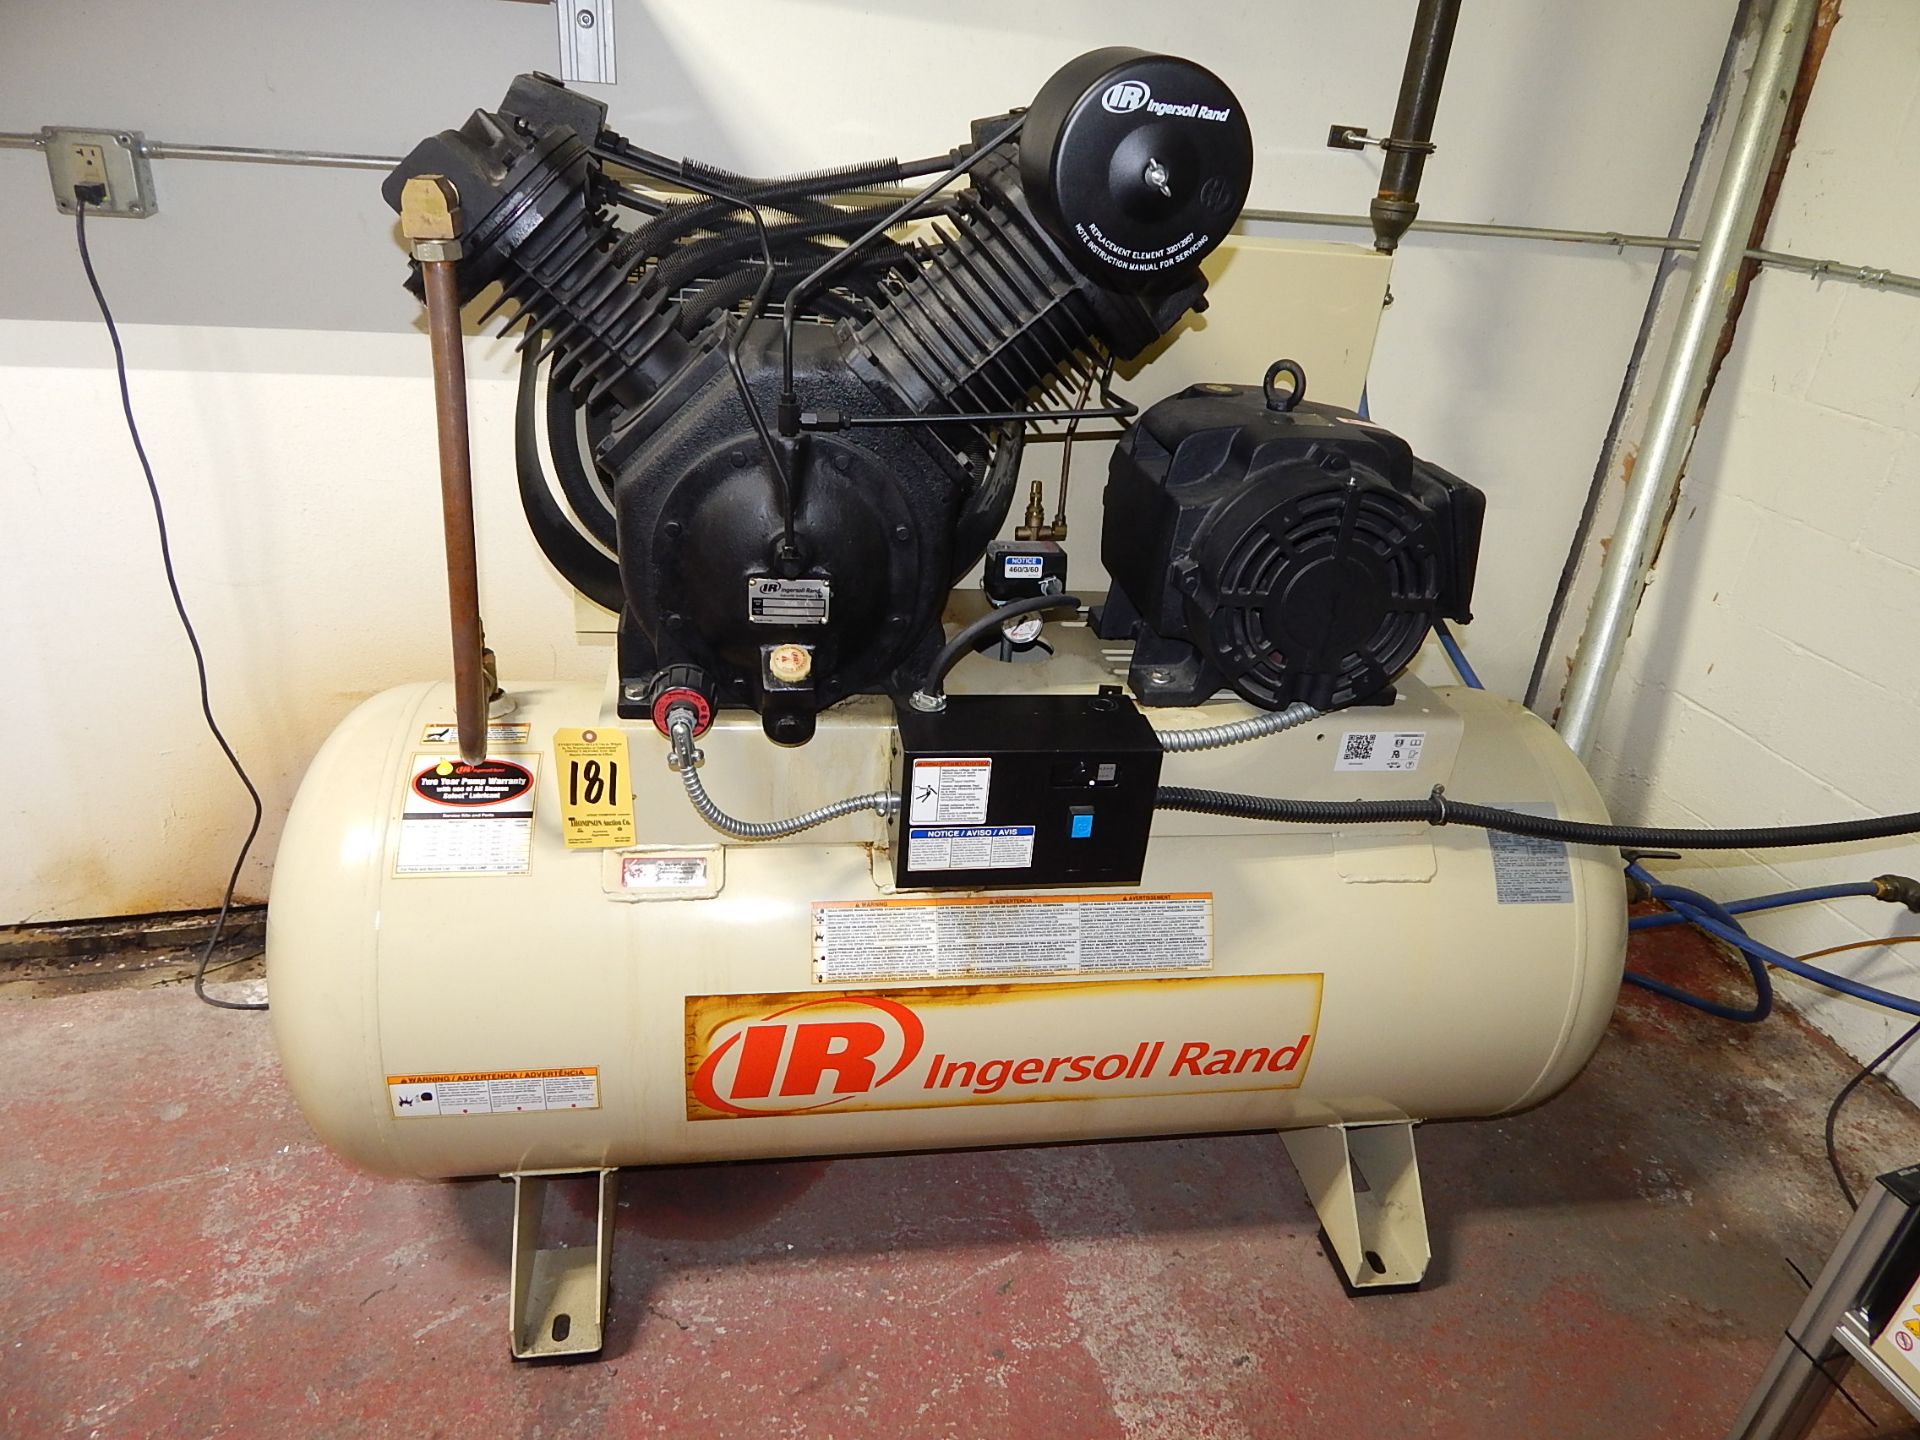 Ingersoll Rand Model 7100E15 2-Stage Tank Mounted Air Compressor, s/n CBV300240, 15 HP, 3 Phase,